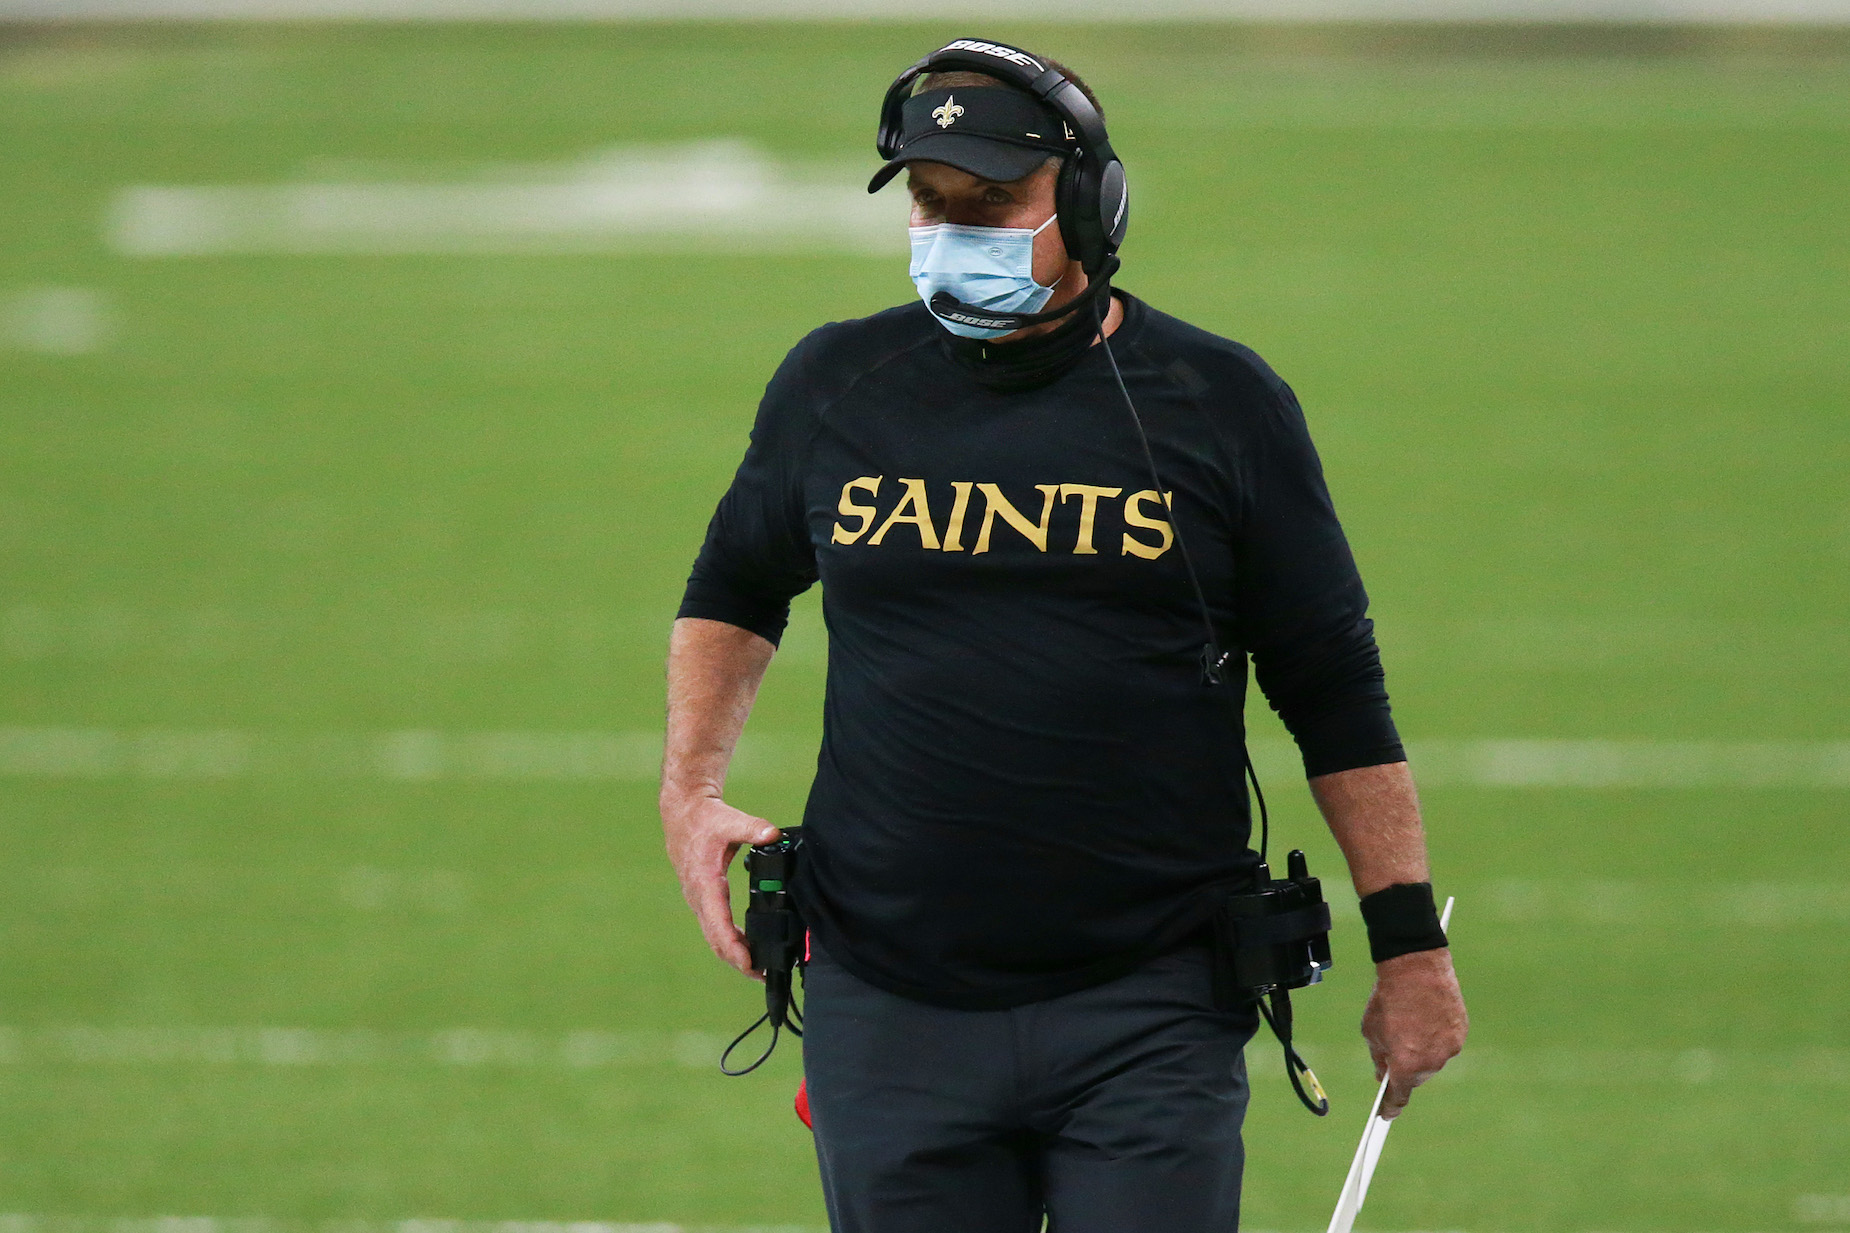 Sean Payton is using a $2 face mask to avoid future fines from Roger Goodell.